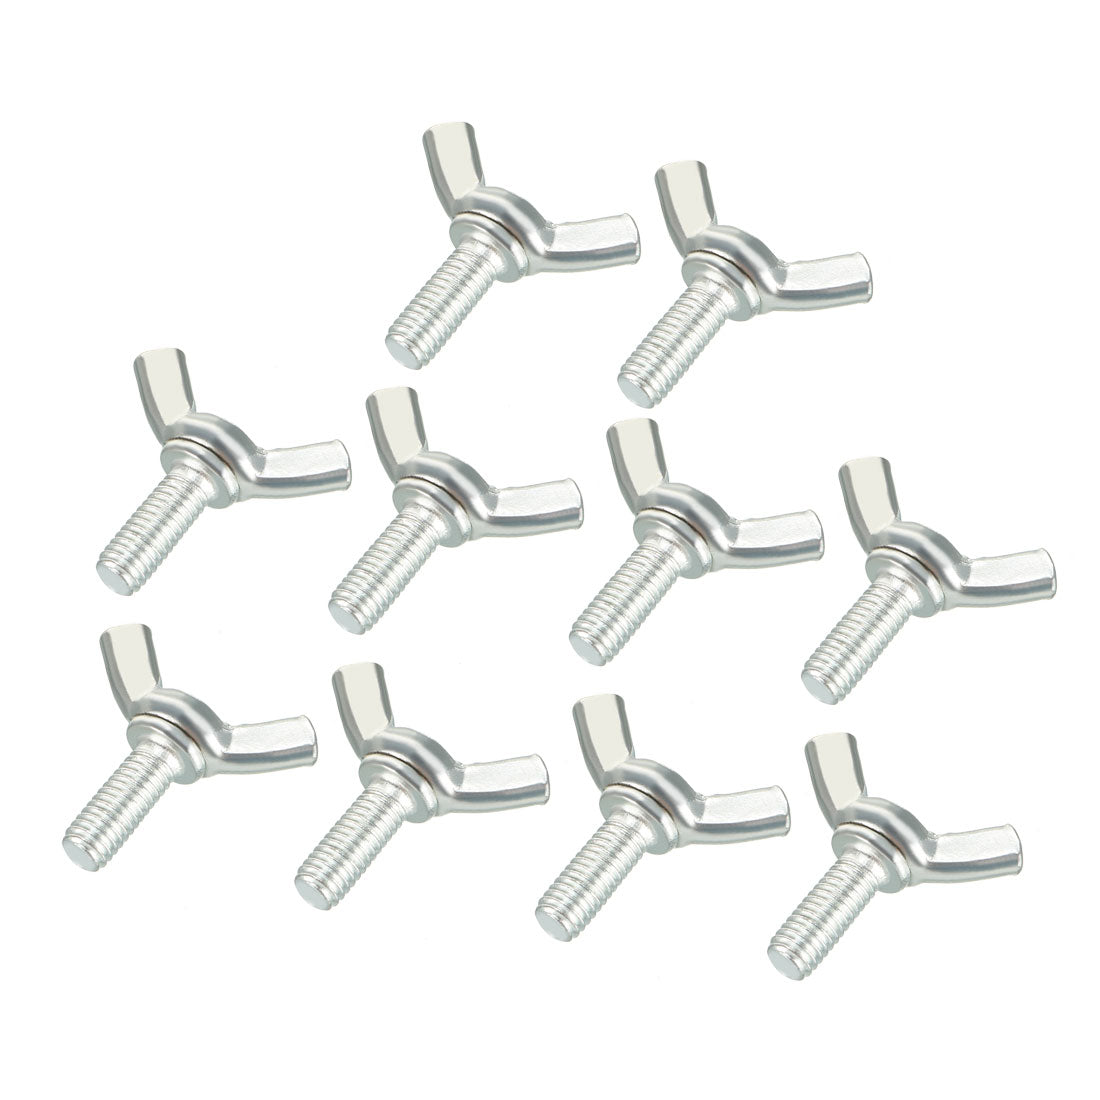 uxcell Uxcell Wingbolt Butterfly Wing Thumb Hand Screws Bolts M5x12mm 0.8mm Pitch Carbon Steel 10pcs